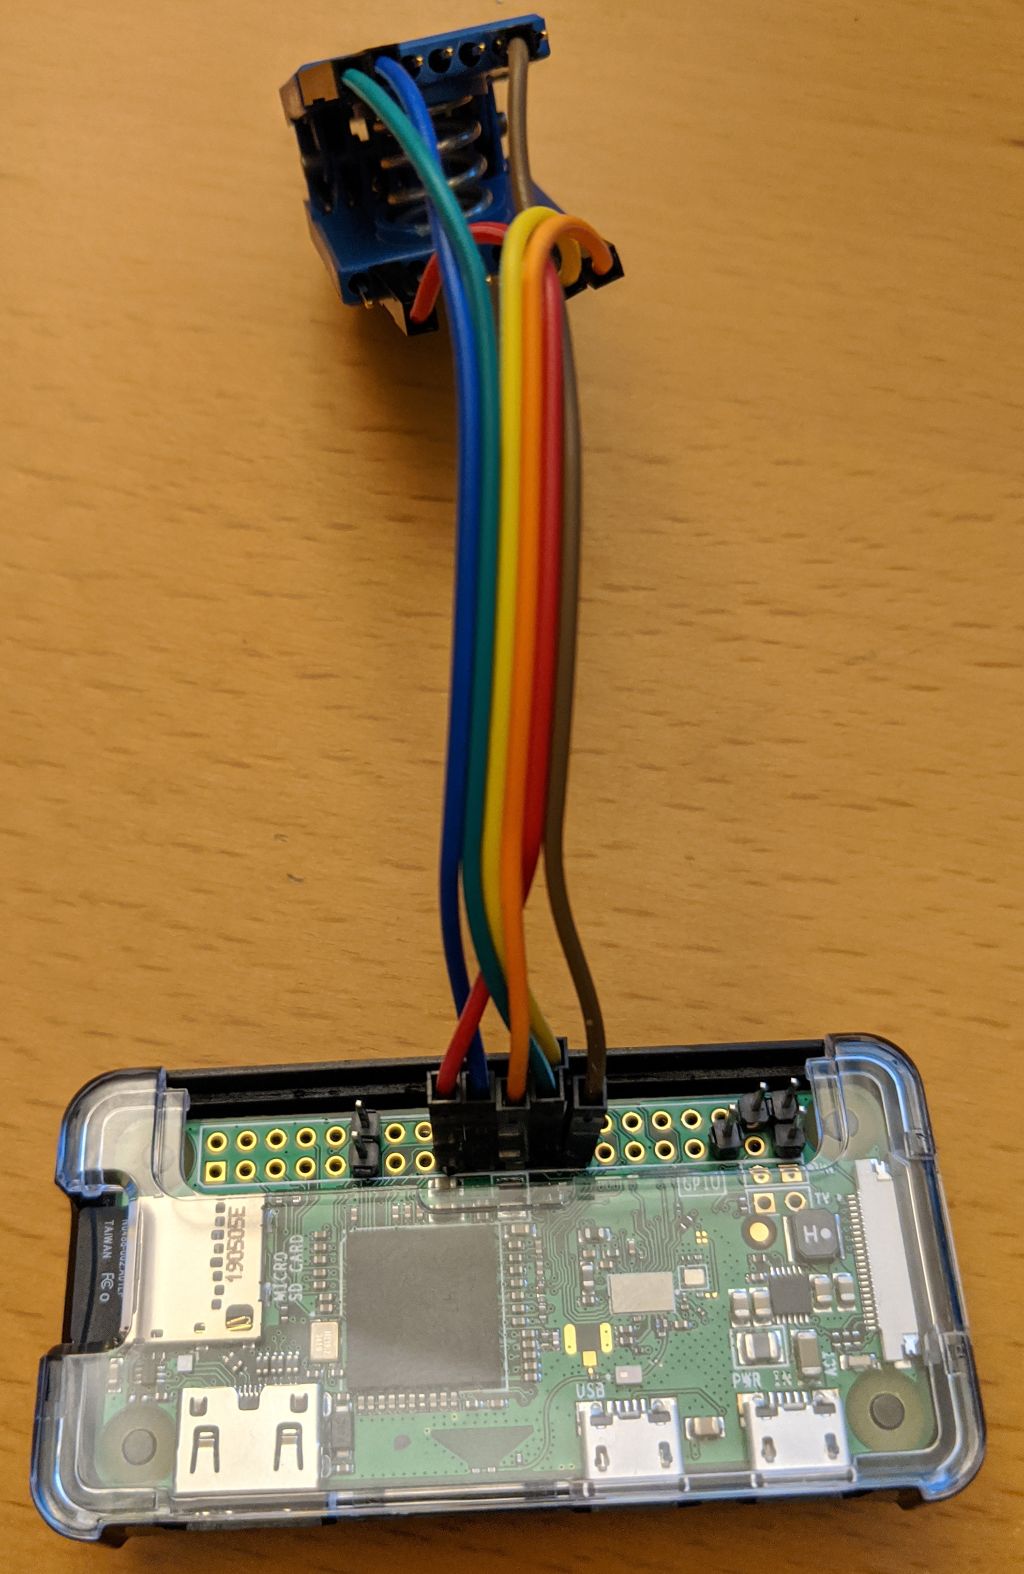 A Raspberry Pi Zero W with wires connected to the SPI0 pins